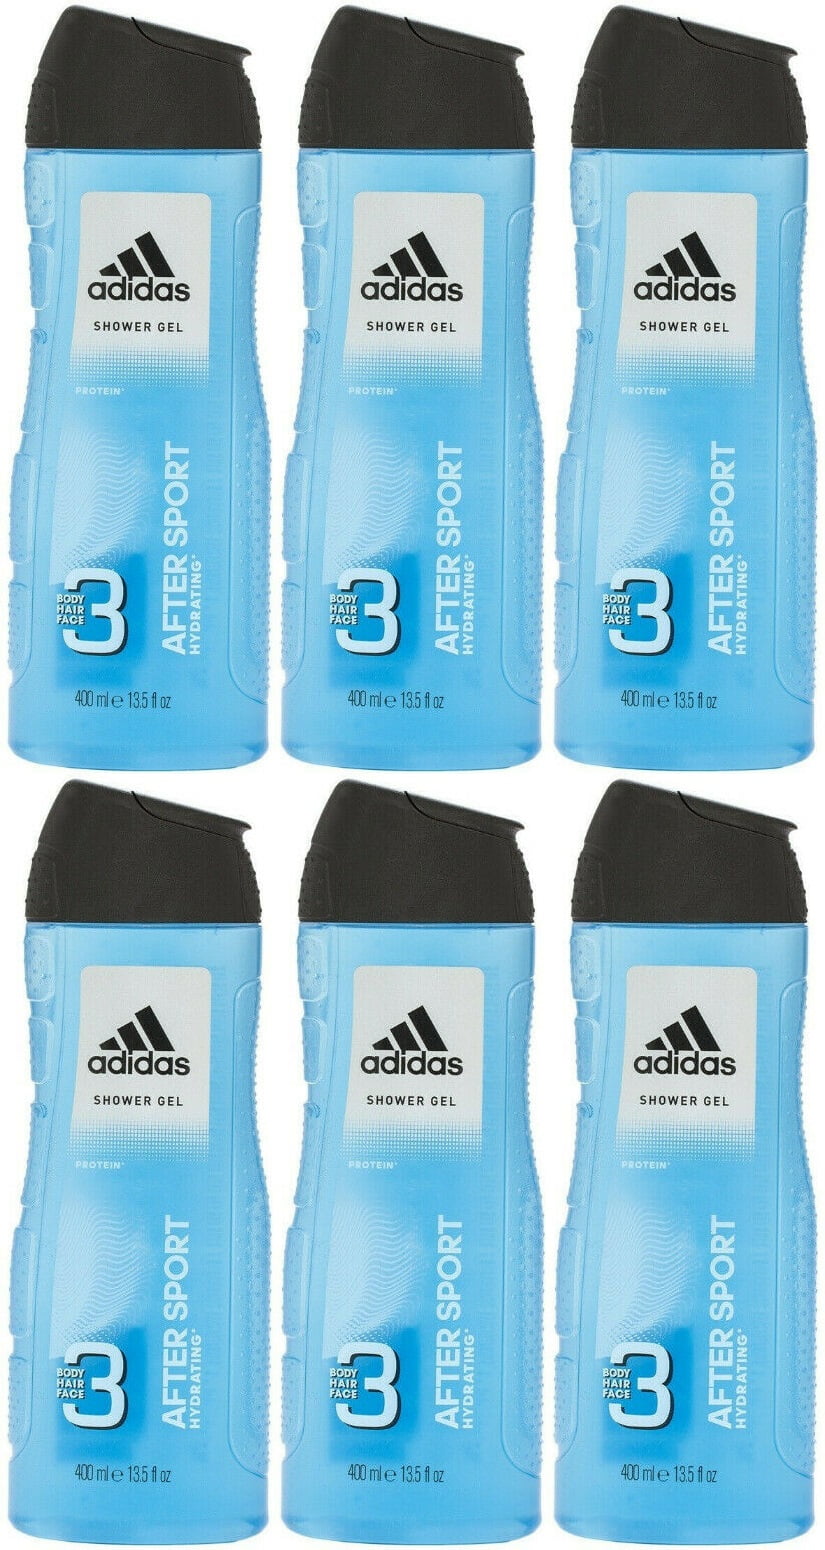 adidas after sport body hair face